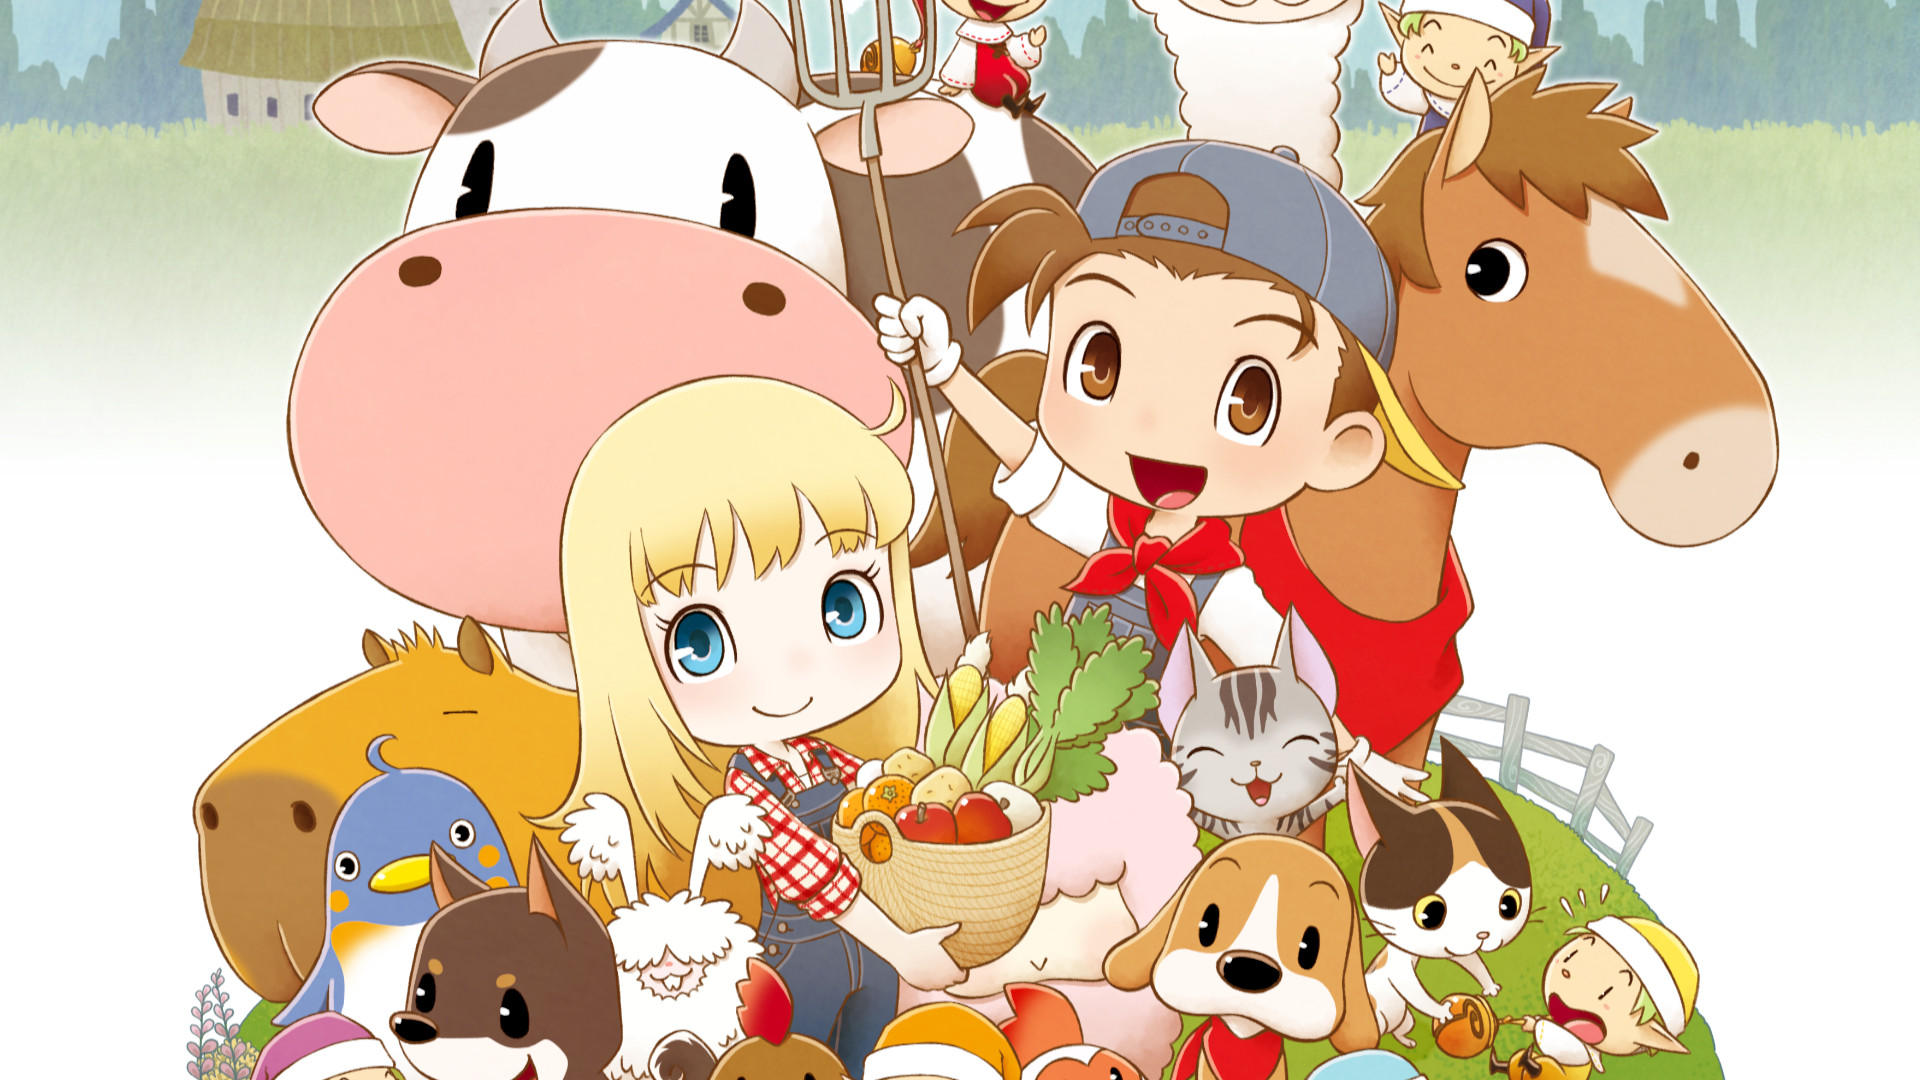 story of seasons friends of mineral town release date switch us